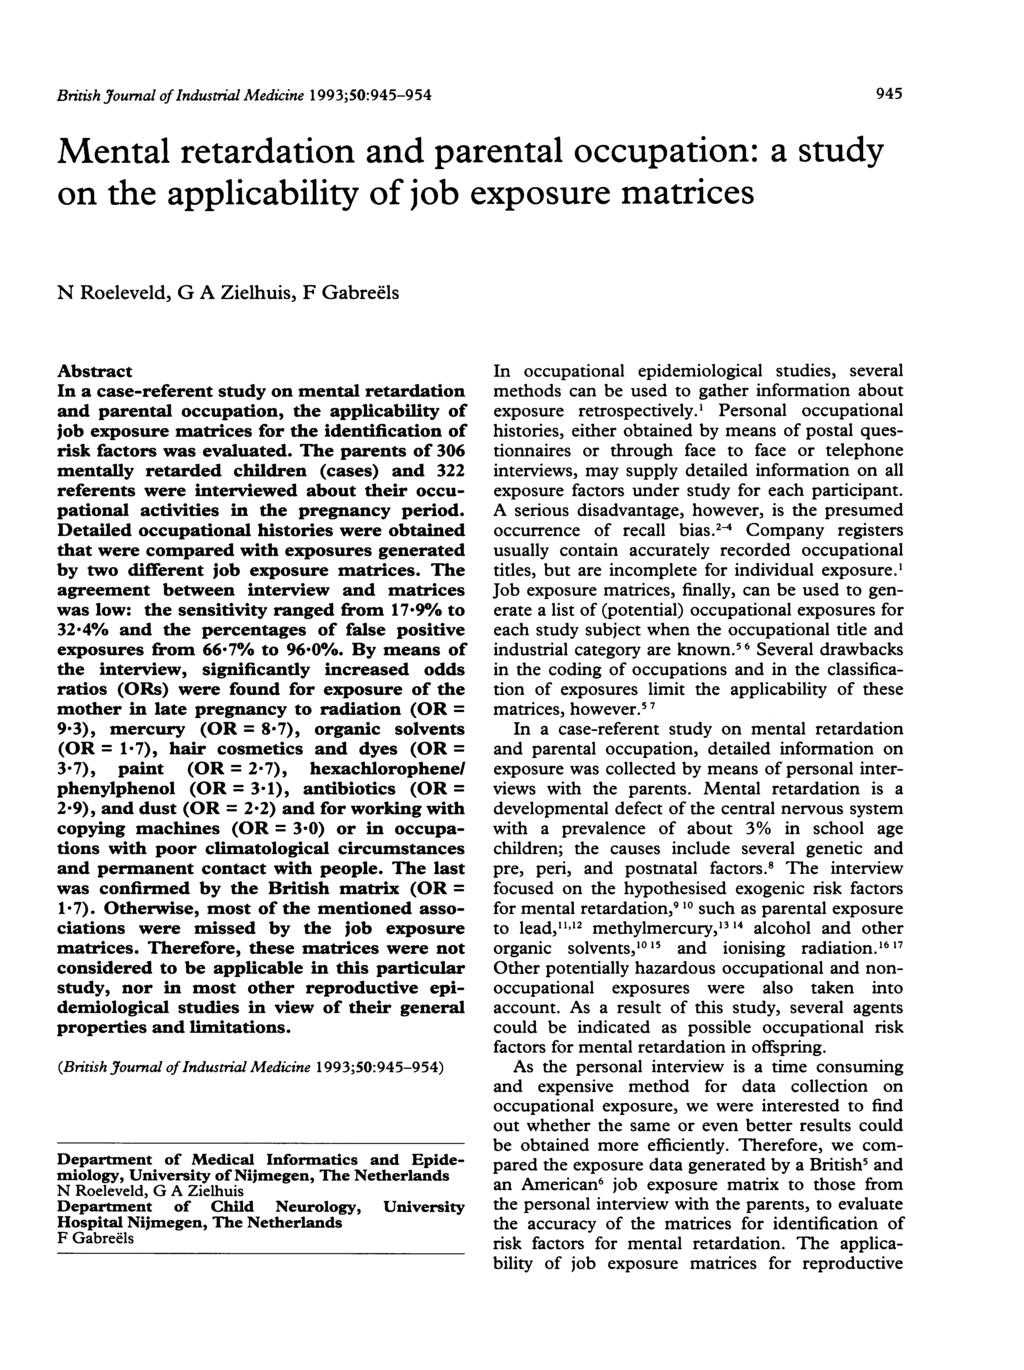 British Journal of Industrial Medicine 1993;50:945-954 AMental retardation and parental occupation: a study on the applicability of job exposure matrices N Roeleveld, G A Zielhuis, F Gabreels